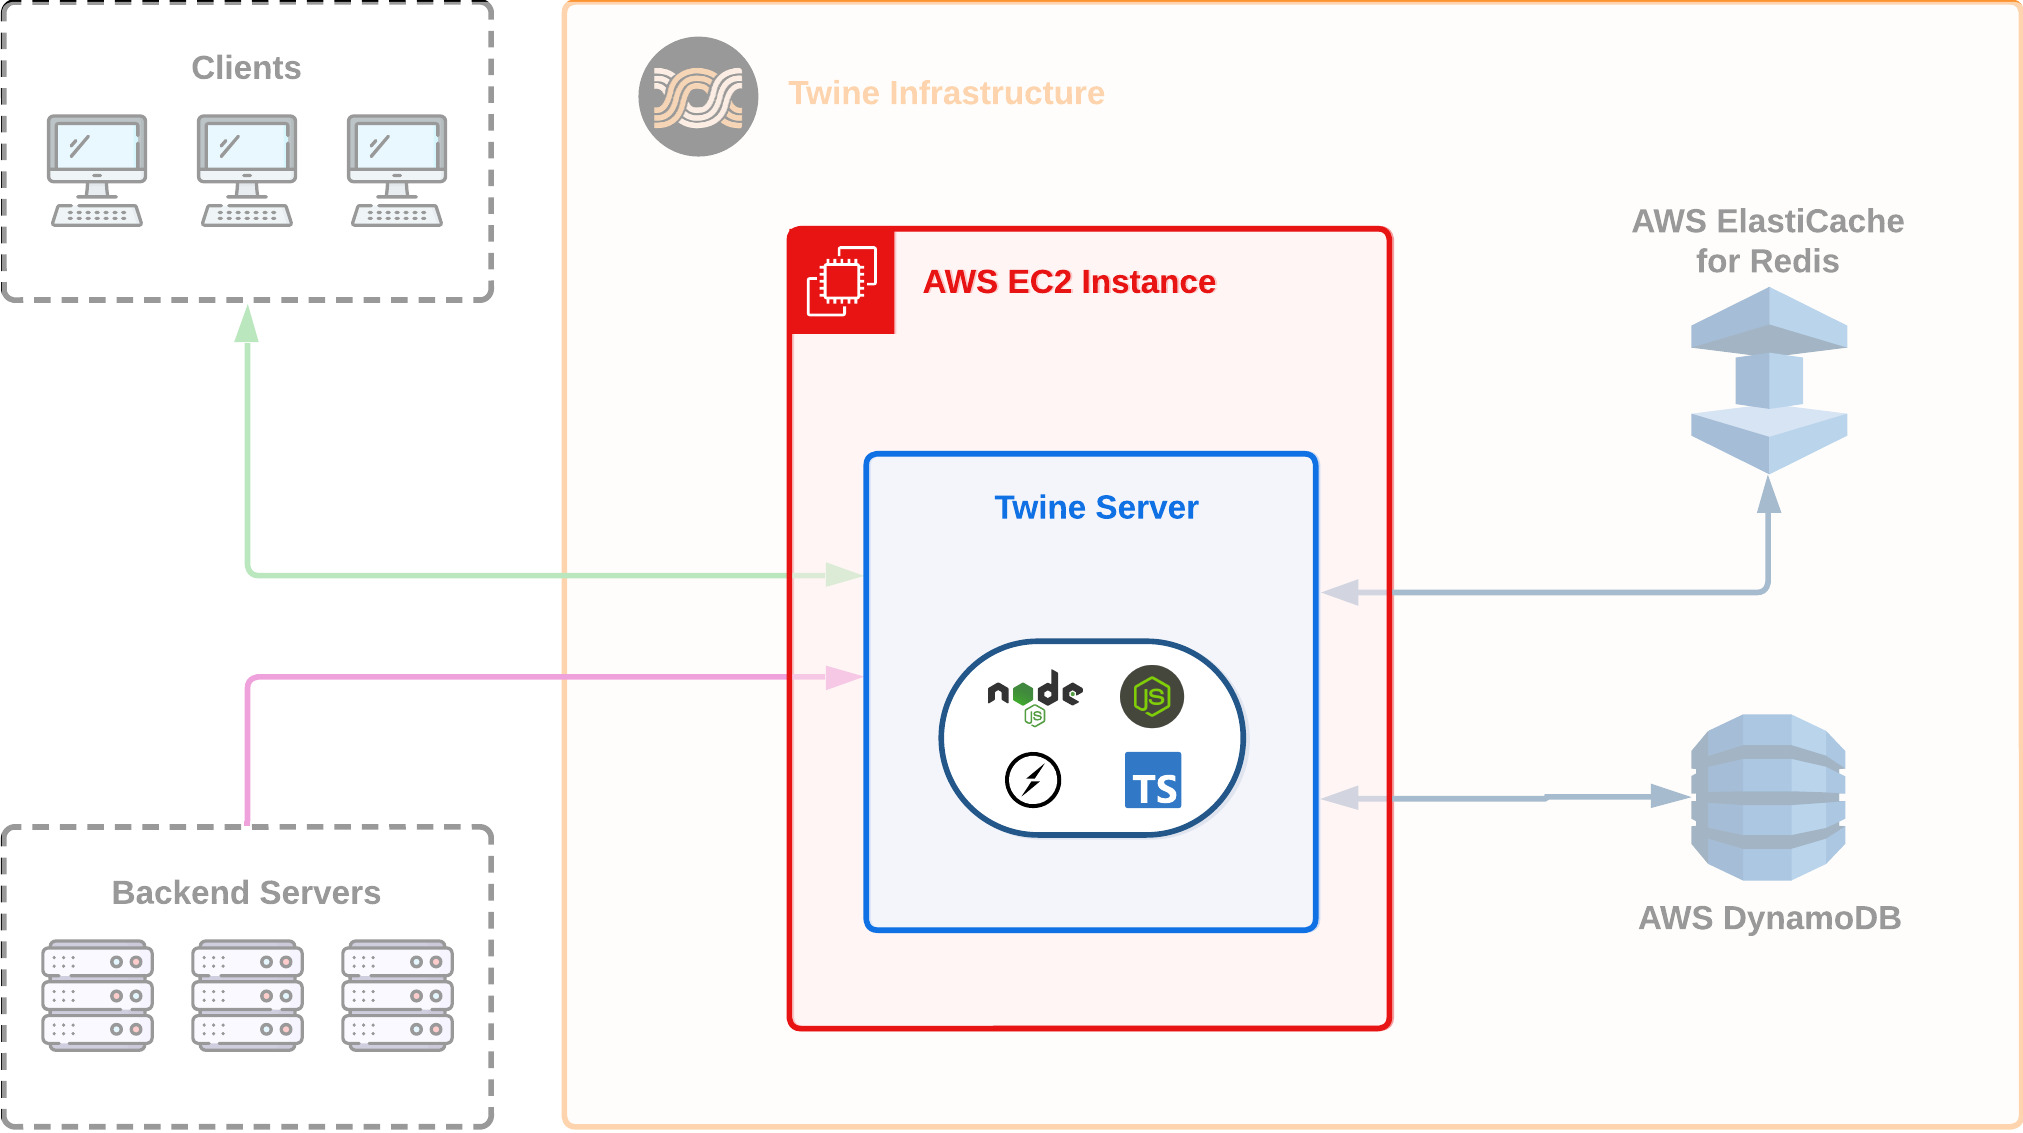 Diagram showing a Twine server deployed in an EC2 instance